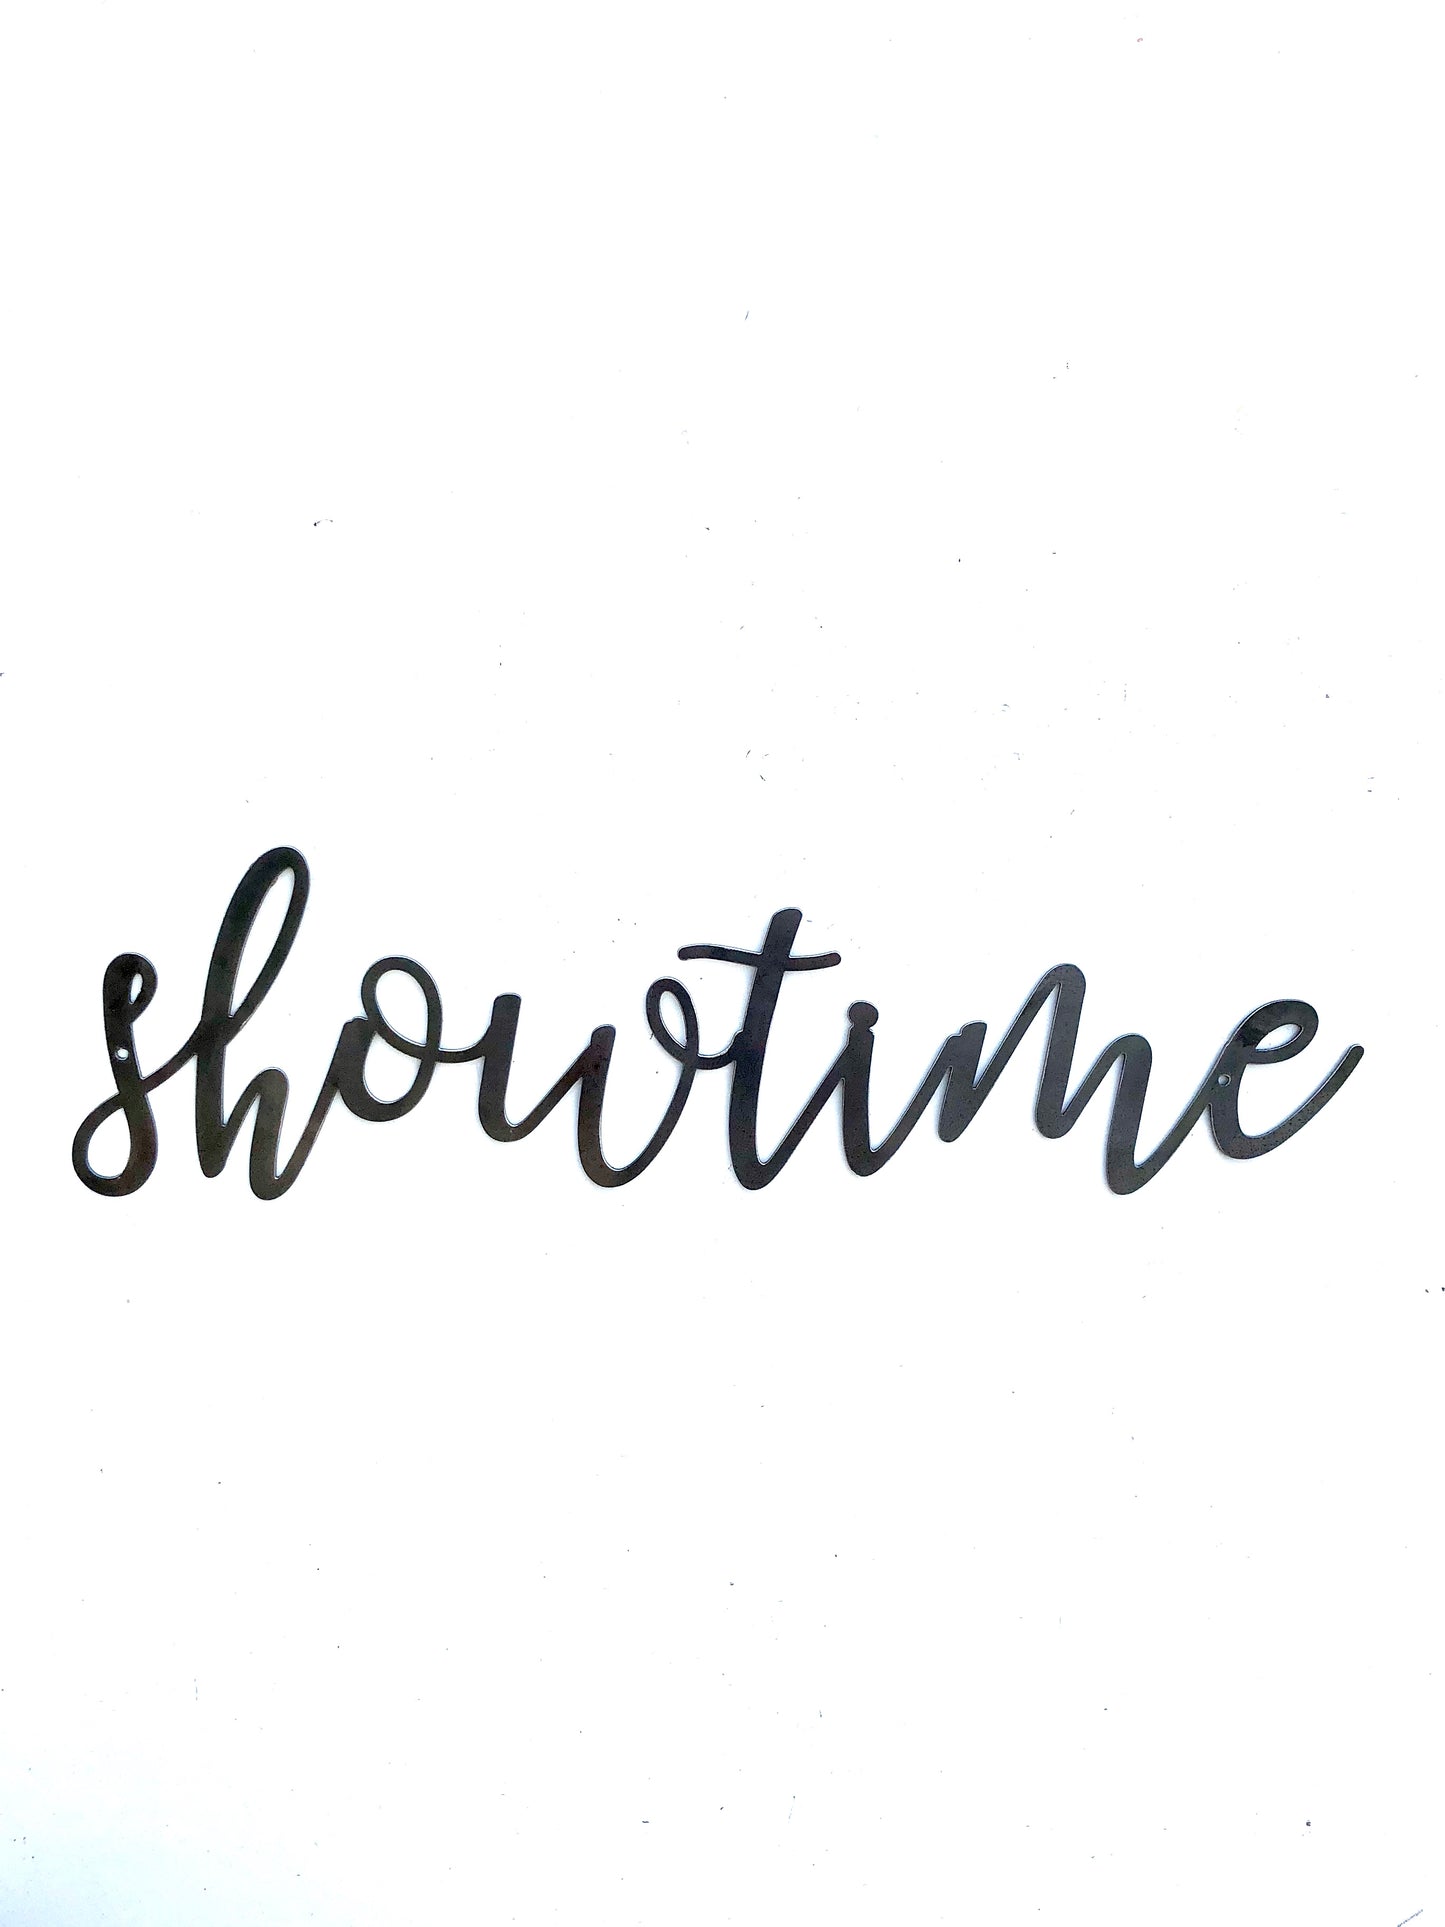 Showtime Script Metal Word Wall Expressions